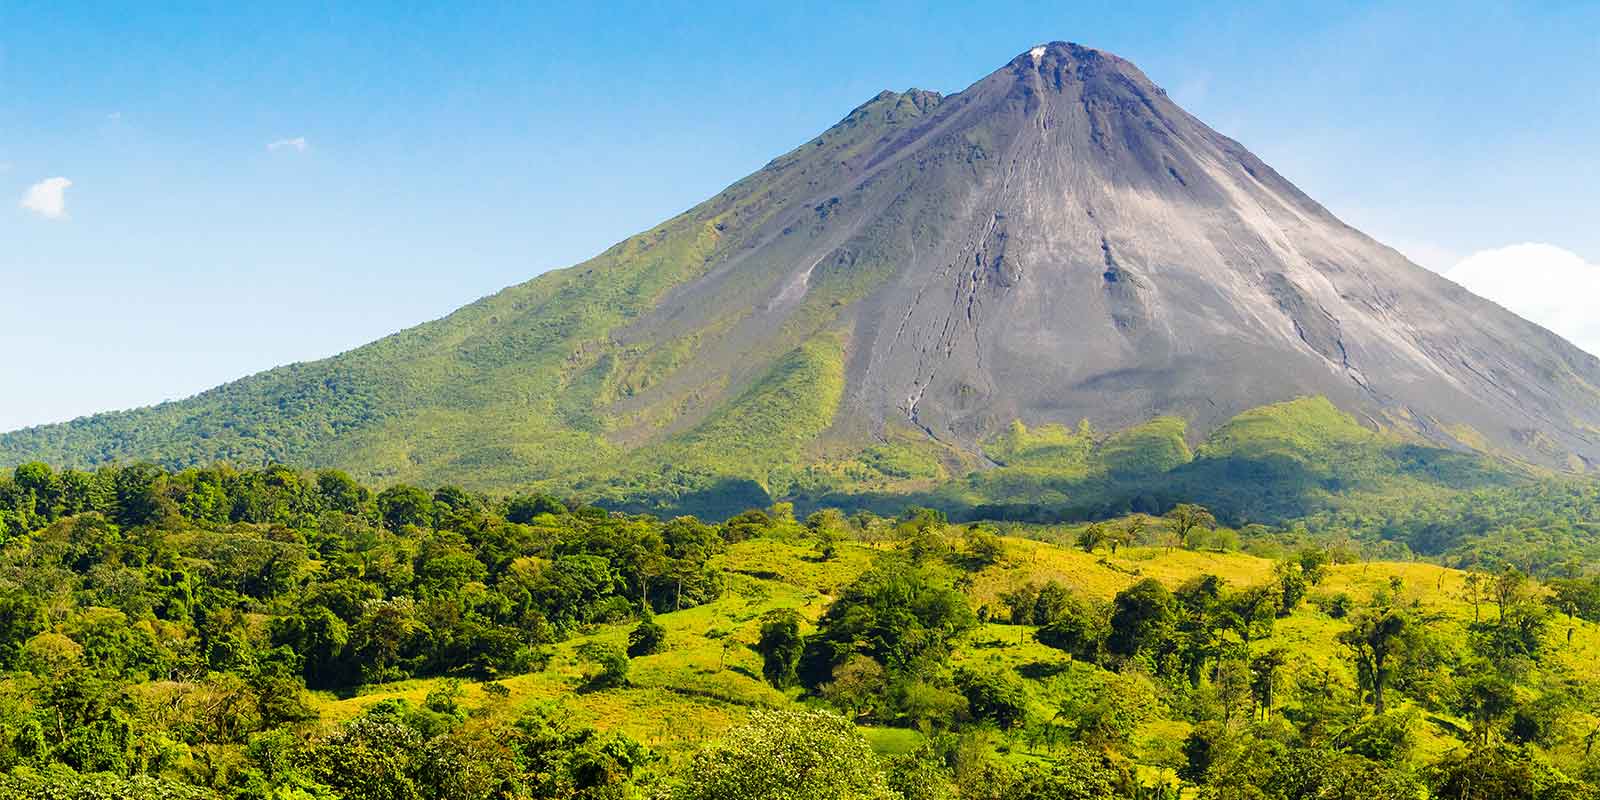 View of Arenal Volcano with vegetation